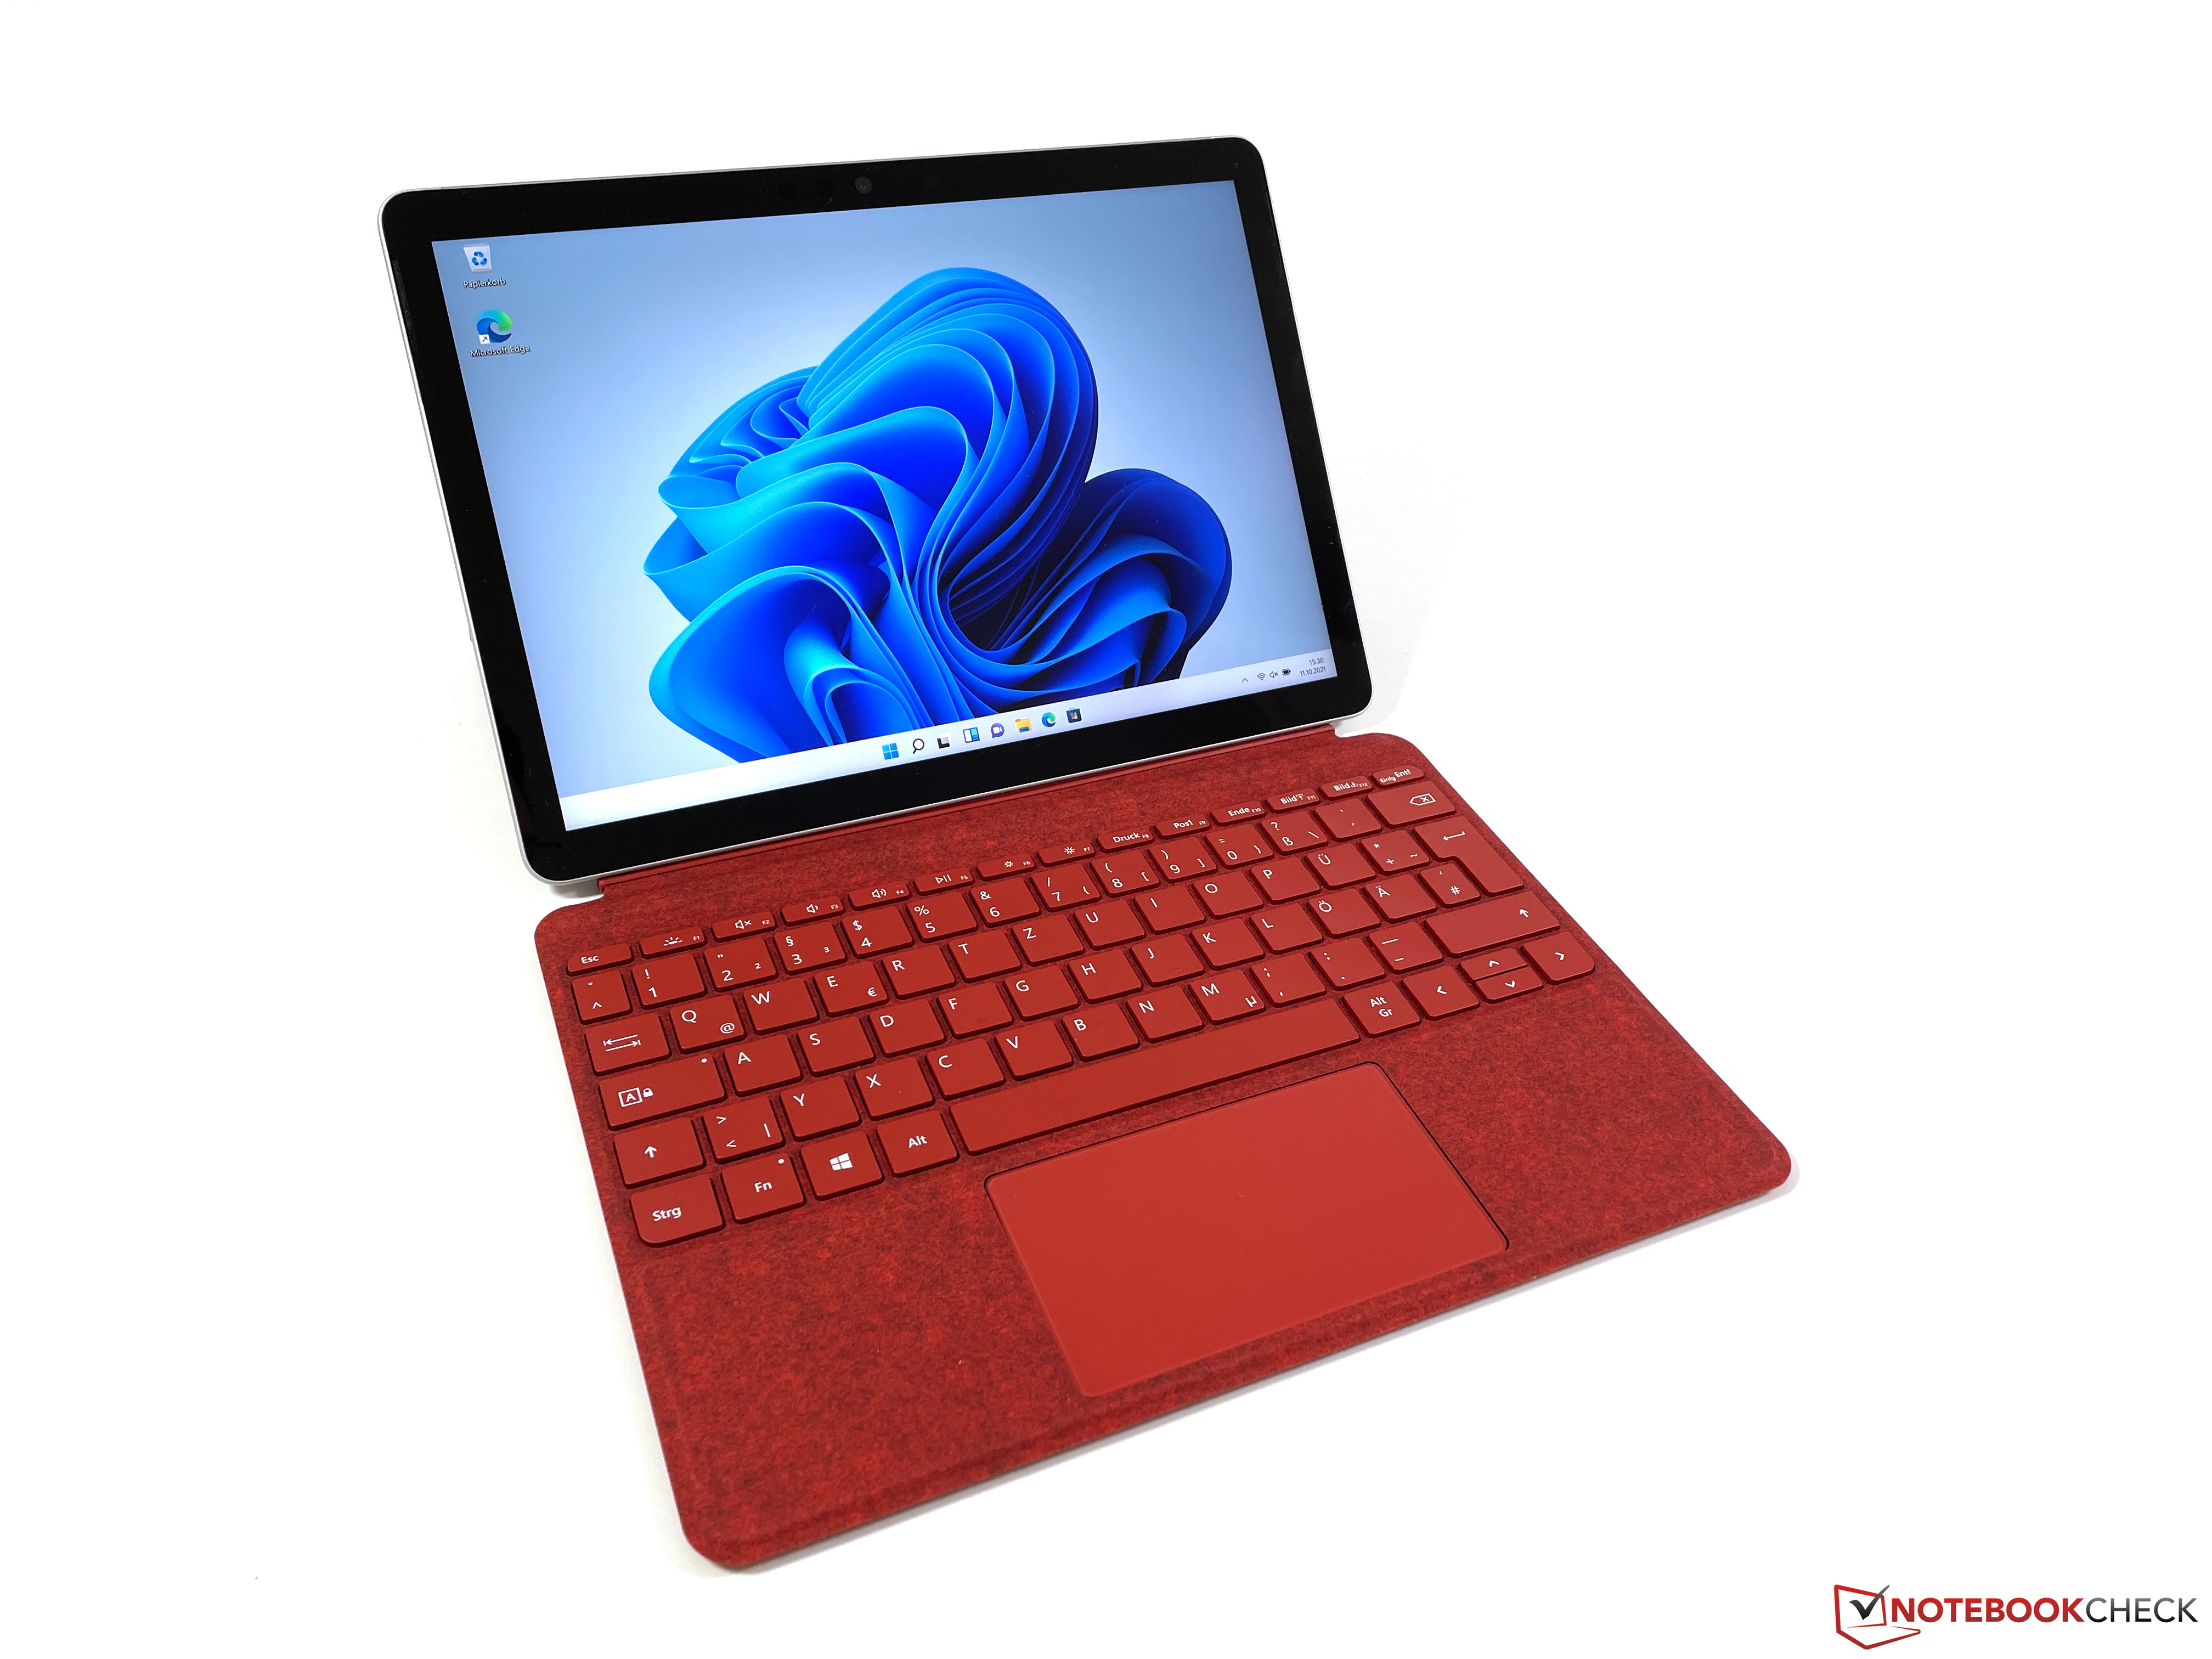 Microsoft Surface Go 3 in review - The compact convertible now